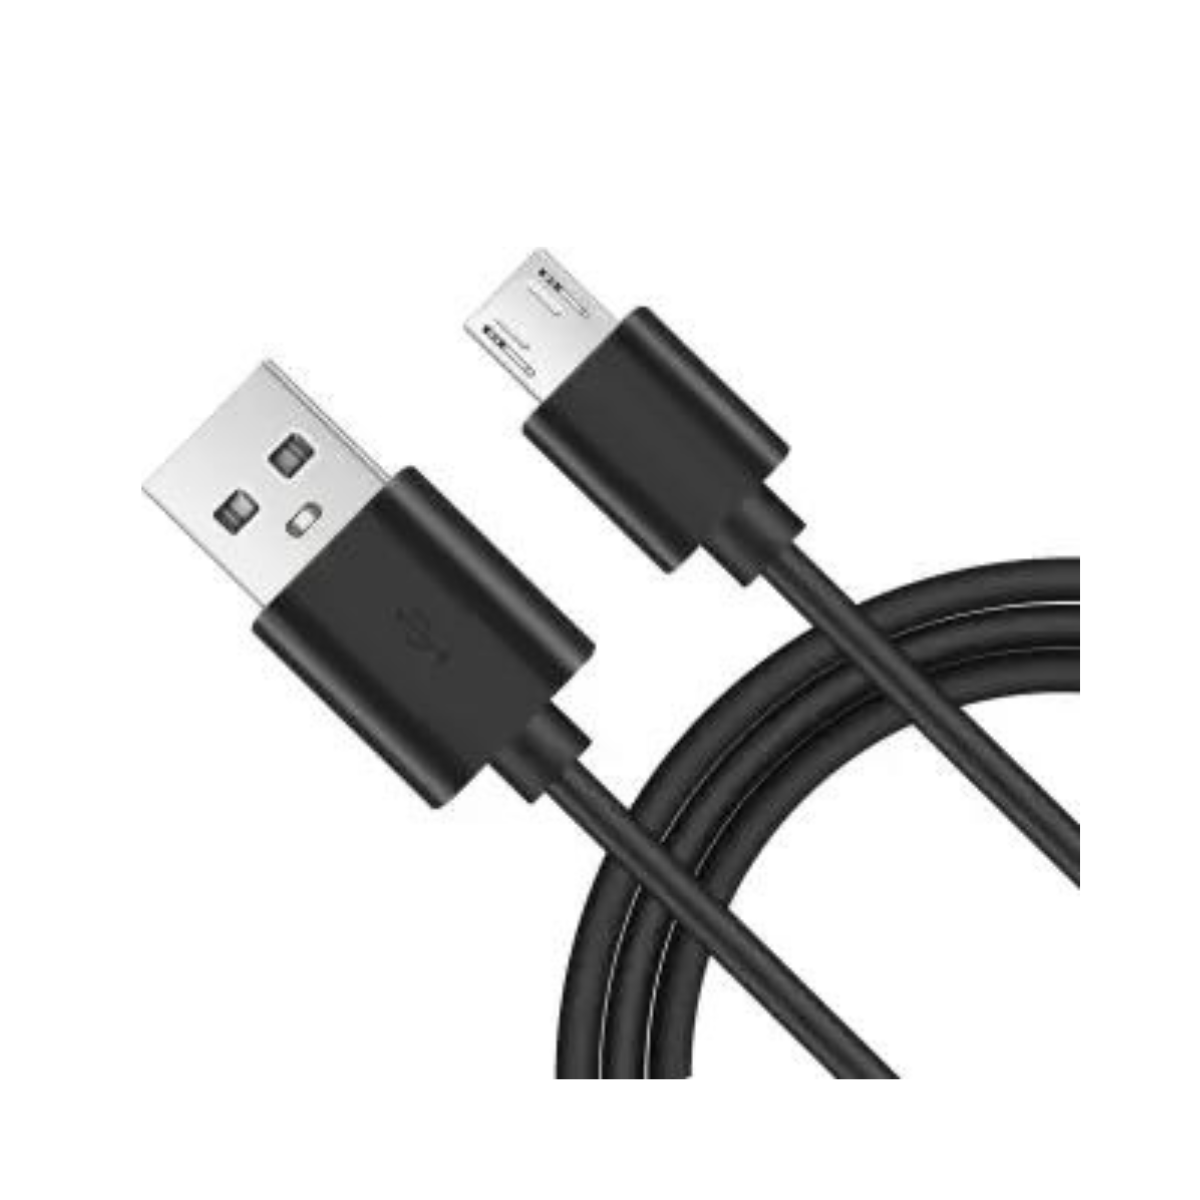 Pebble Fast Charging USB Cable PBCM10 - Micro USB Charge And Sync Cable 2.4A - Black